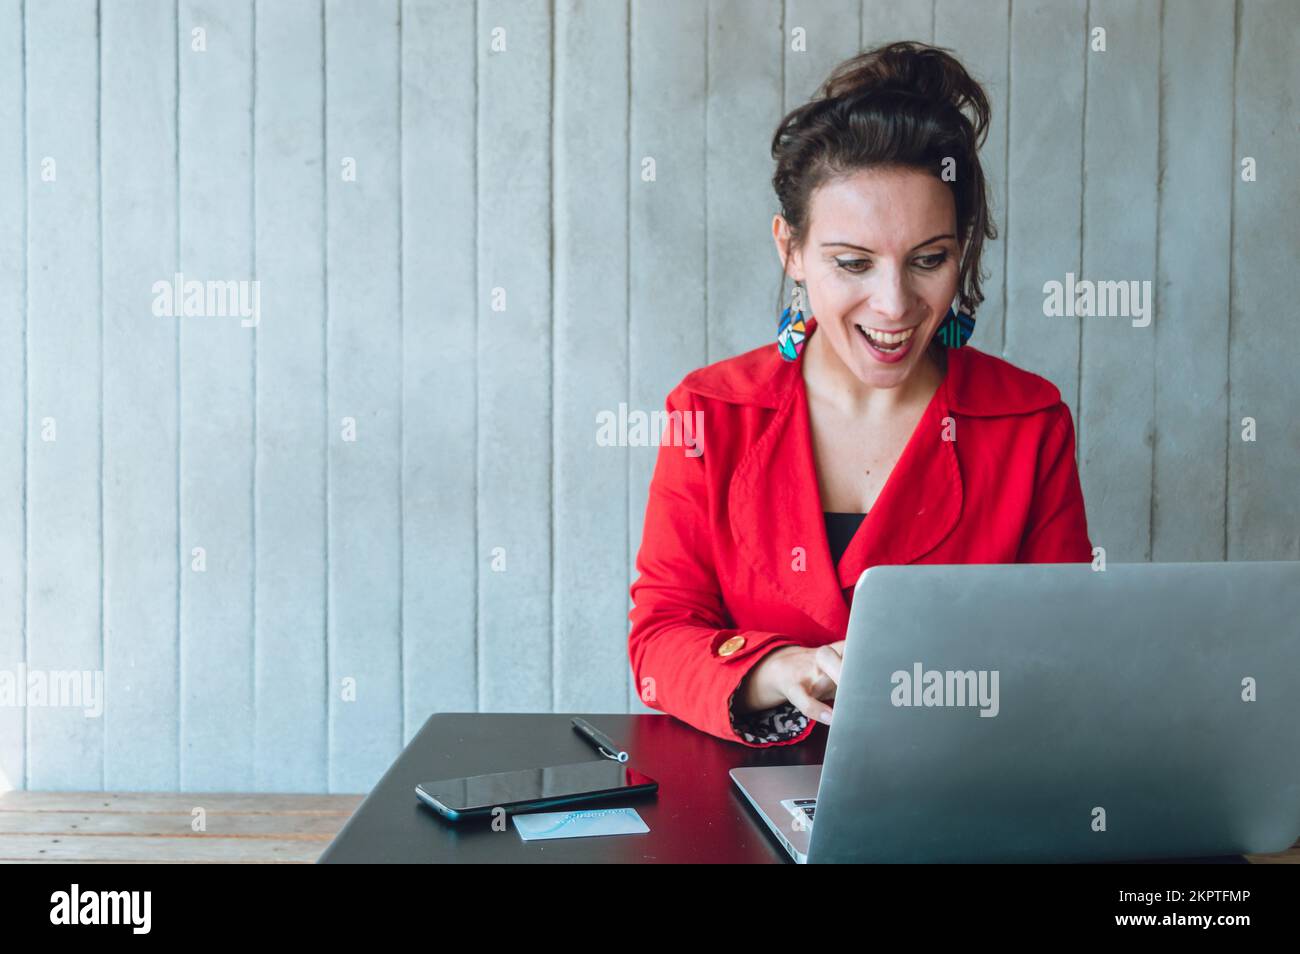 Adult business woman, dressed in red blazer, happy smiling seeing her business profit on the laptop, sitting working in a coffee shop. Stock Photo